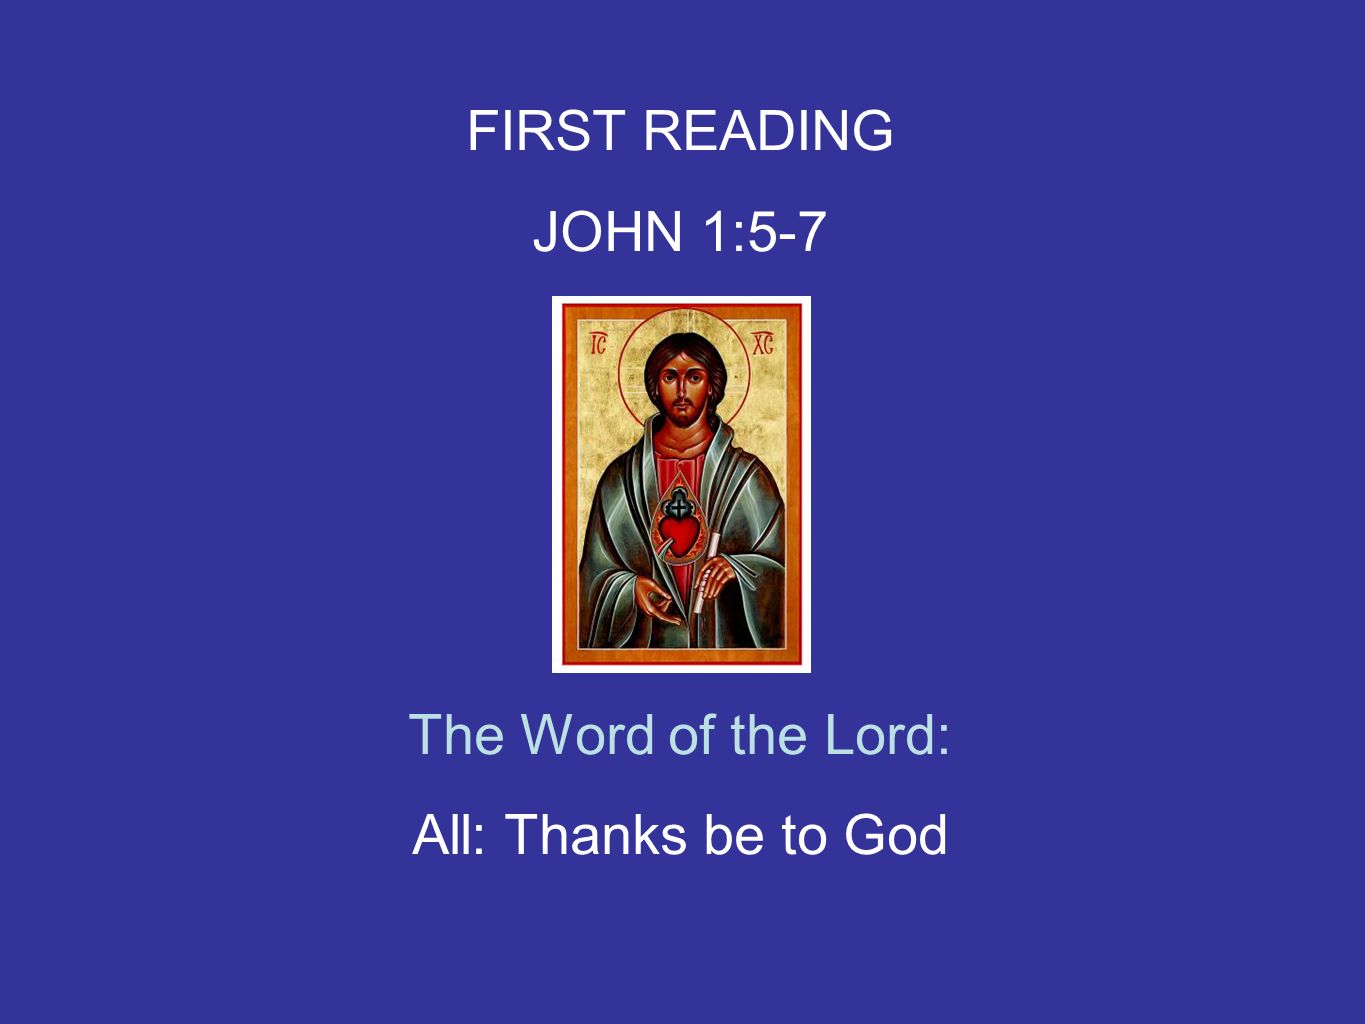 FIRST READING JOHN 1:5-7 The Word of the Lord: All: Thanks be to God